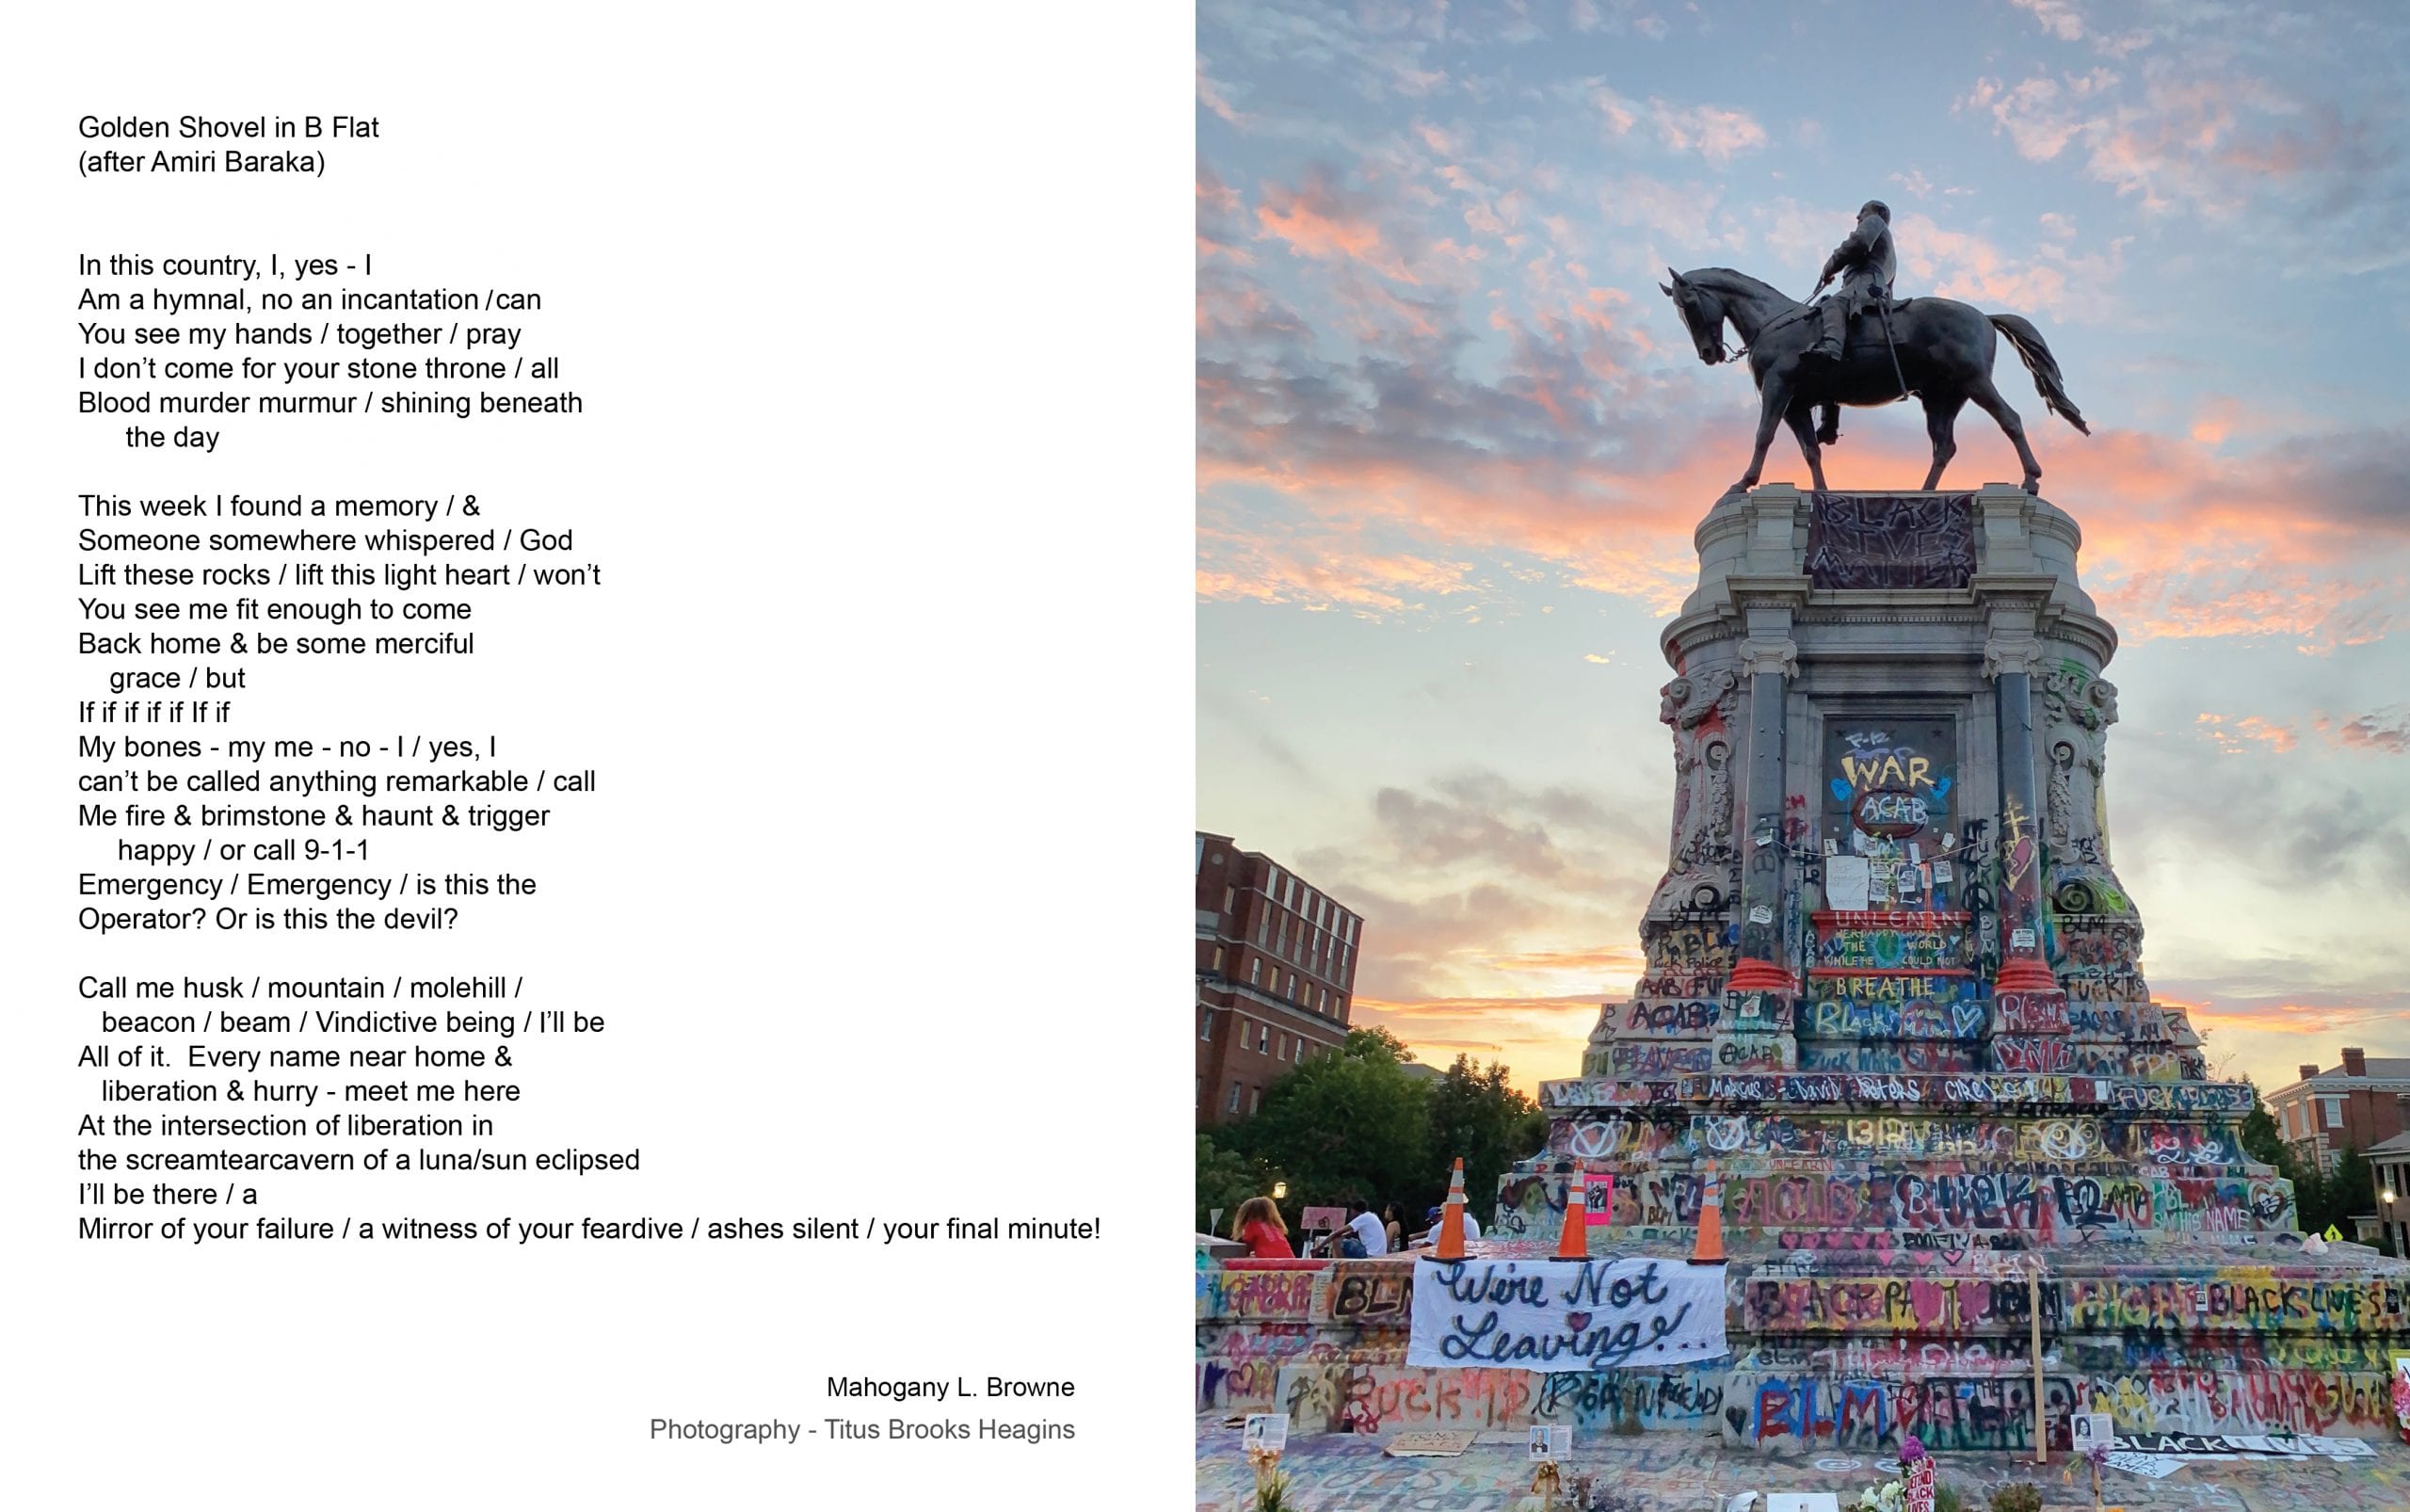 A poem appears on the left; on the right, color photograph of a Confederate monument at dusk. The monument has been painted over with colorful graffiti in protest against its presence and in favor of the Black Lives Matter movement